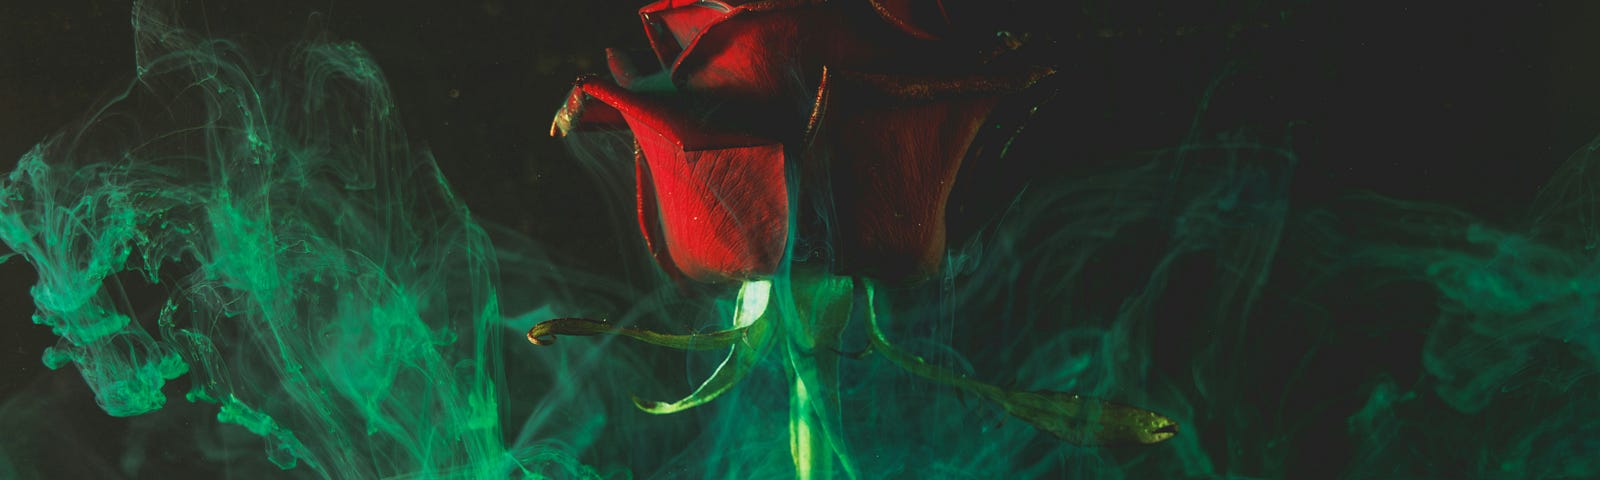 A red rose in green mist